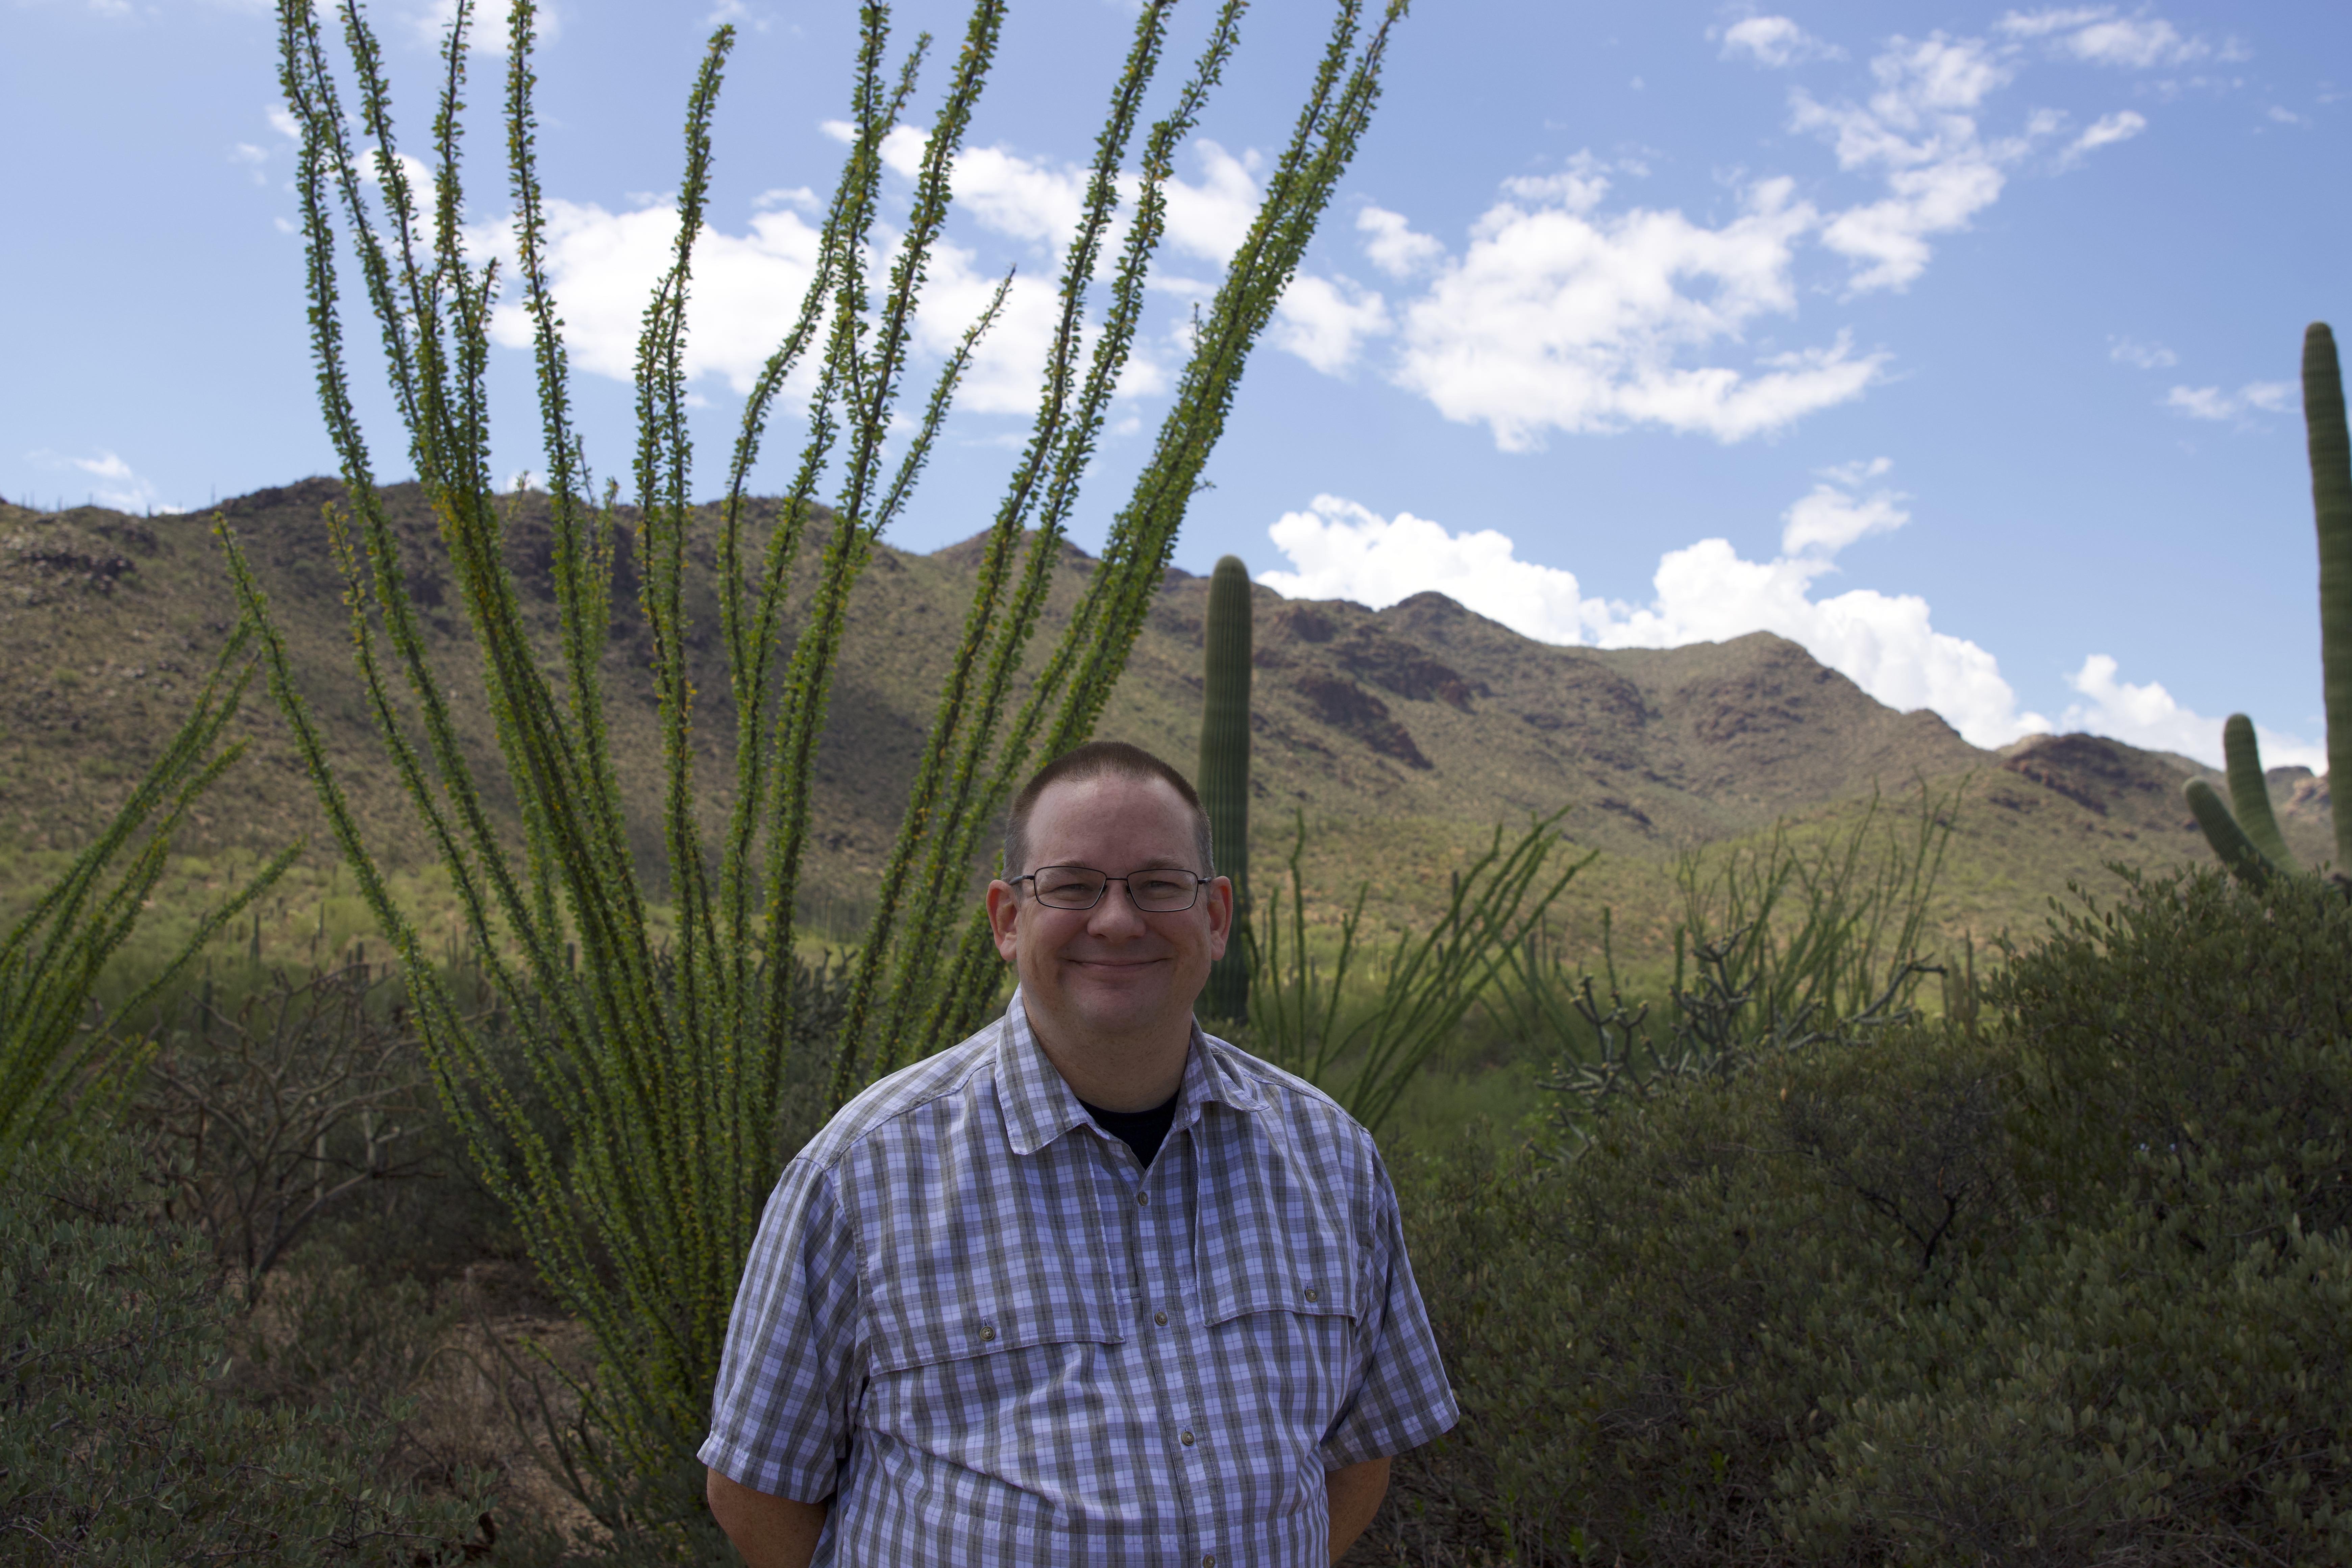 colin waite outside under a sunny sky with desert scenery in the background